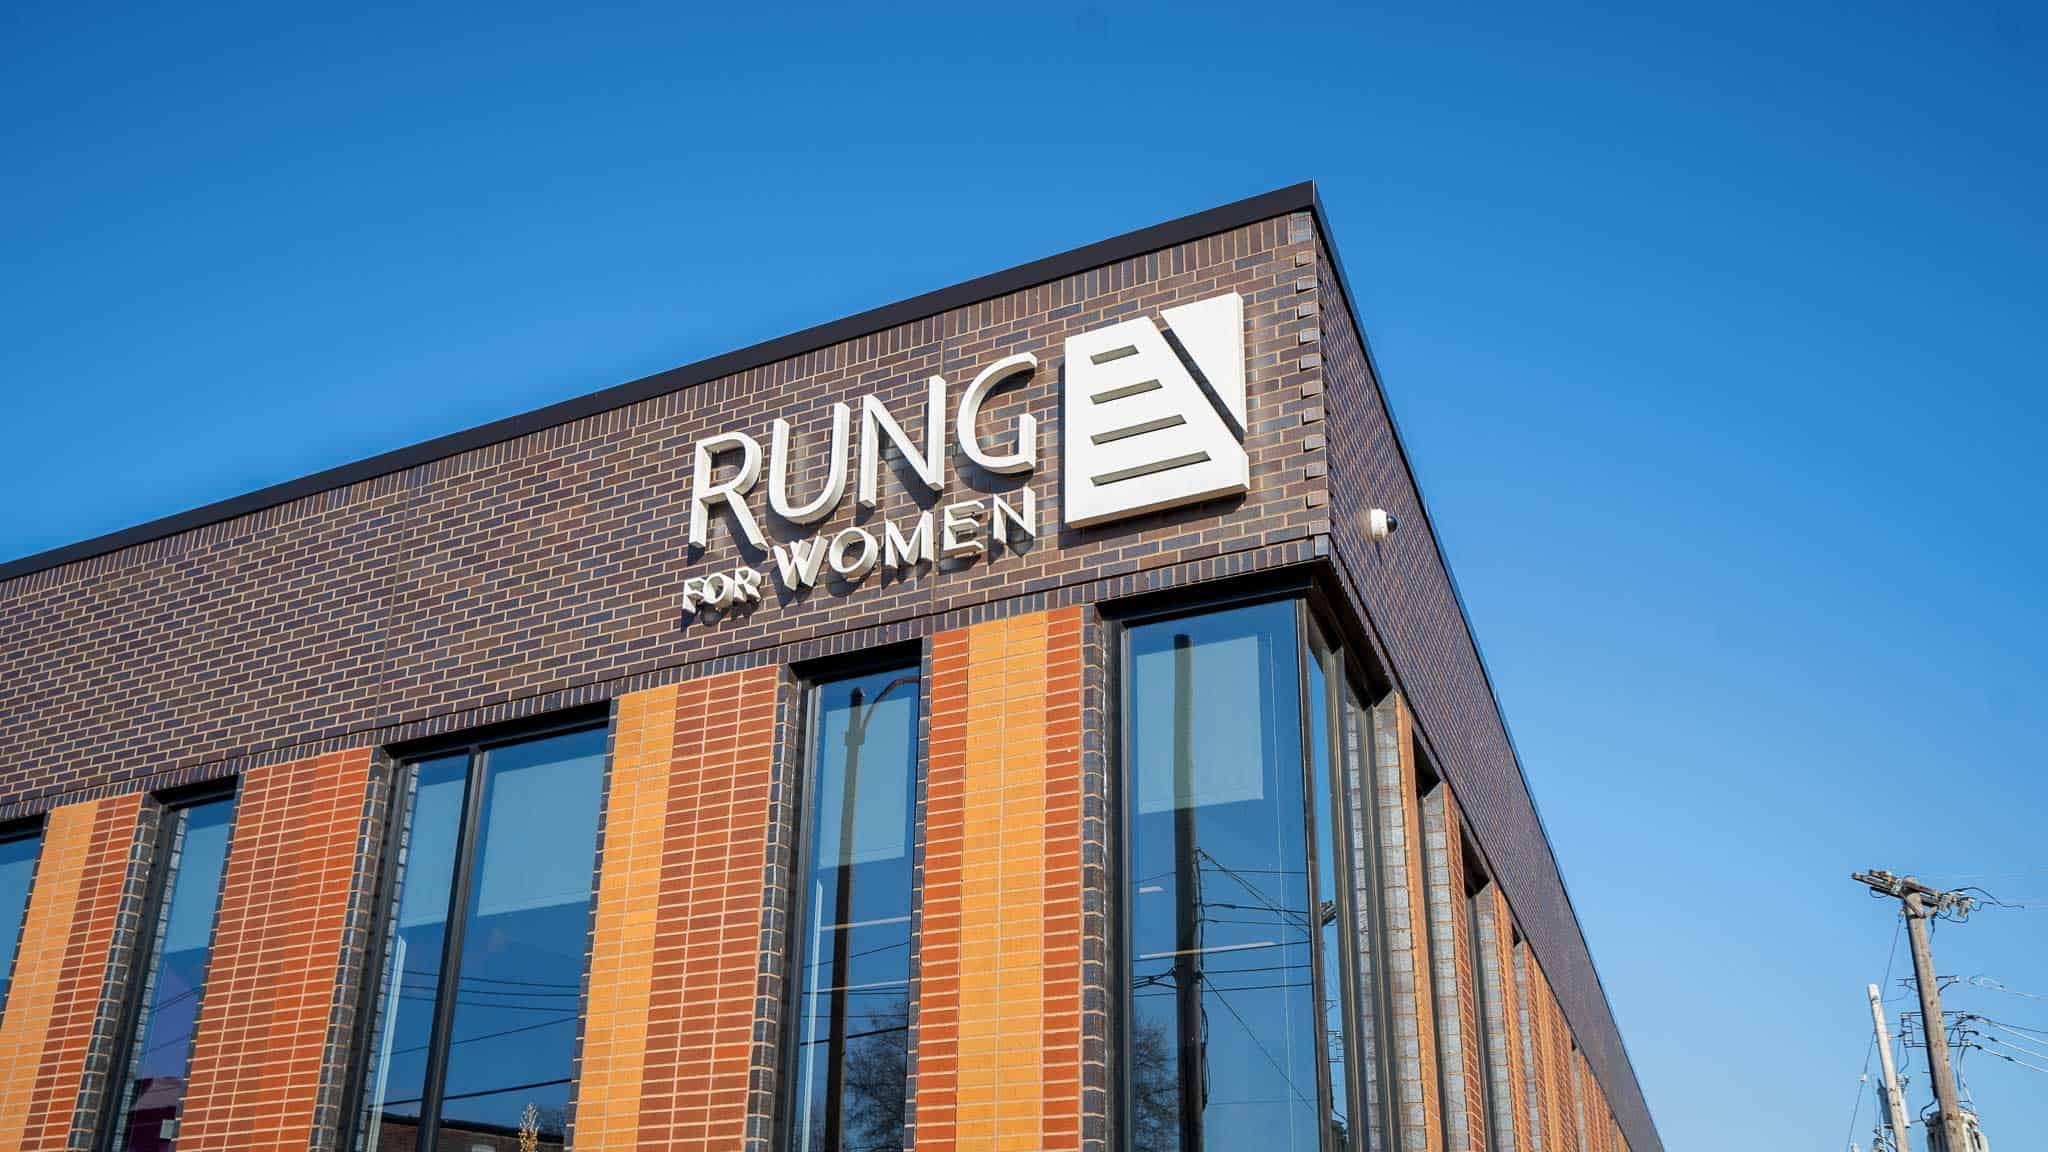 White acrylic exterior sign mounted on top of a building for rung for women